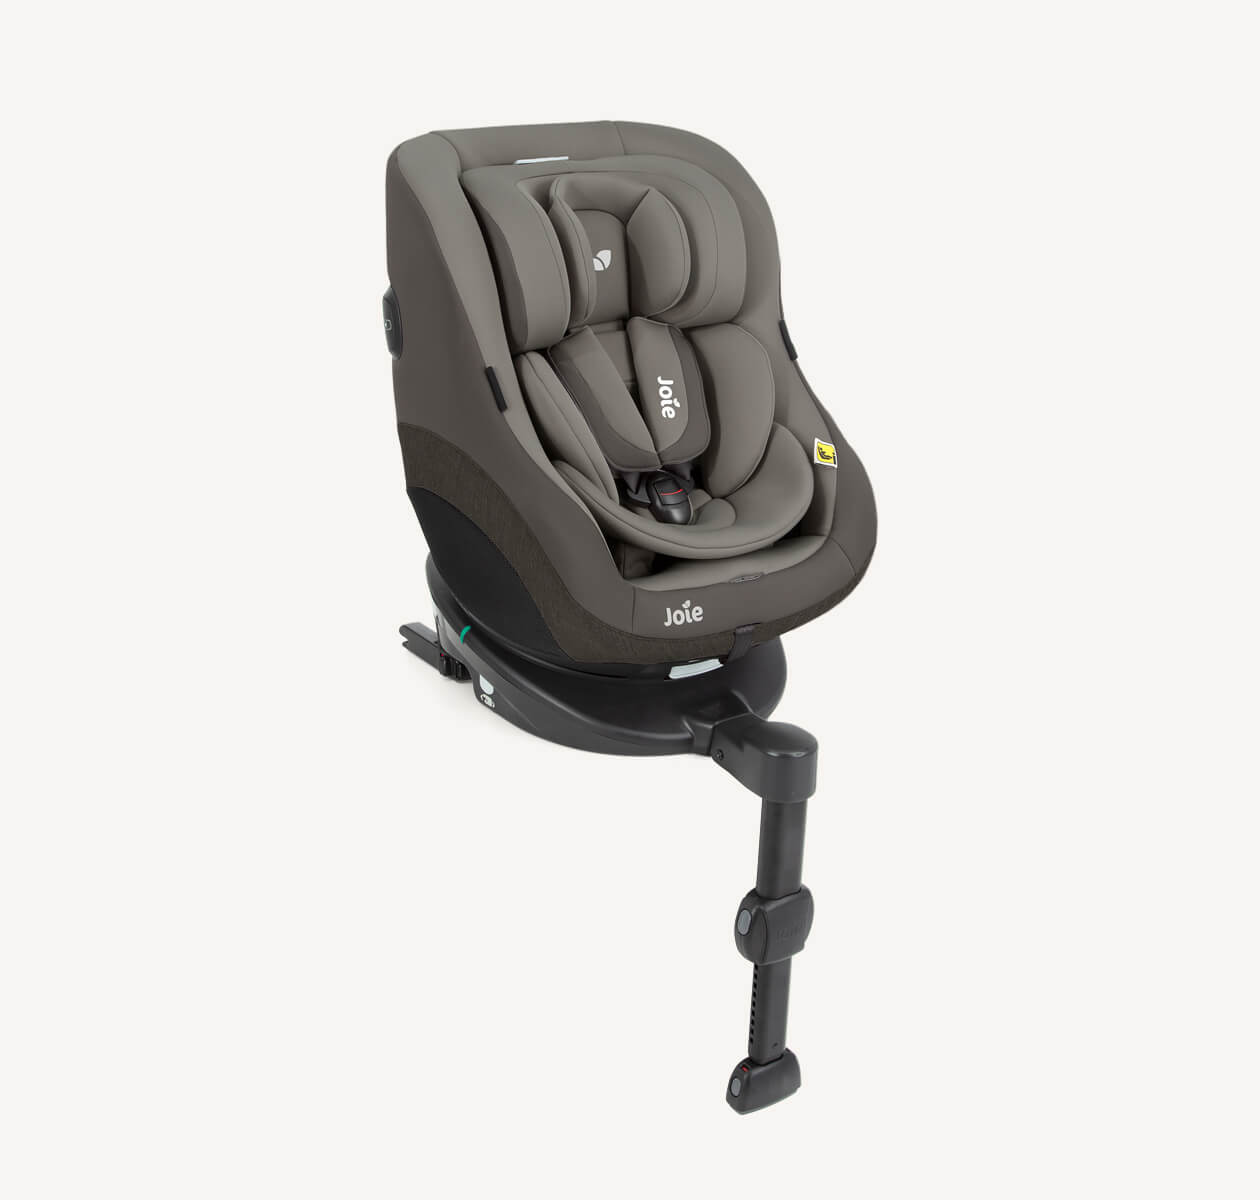 https://dd.joiebaby.com/media/catalog/product/p/1/p1-joie-spinning-car-seat-spin360gti-cobblestoner-right-angle-infant.jpg?type=product&height=265&width=265